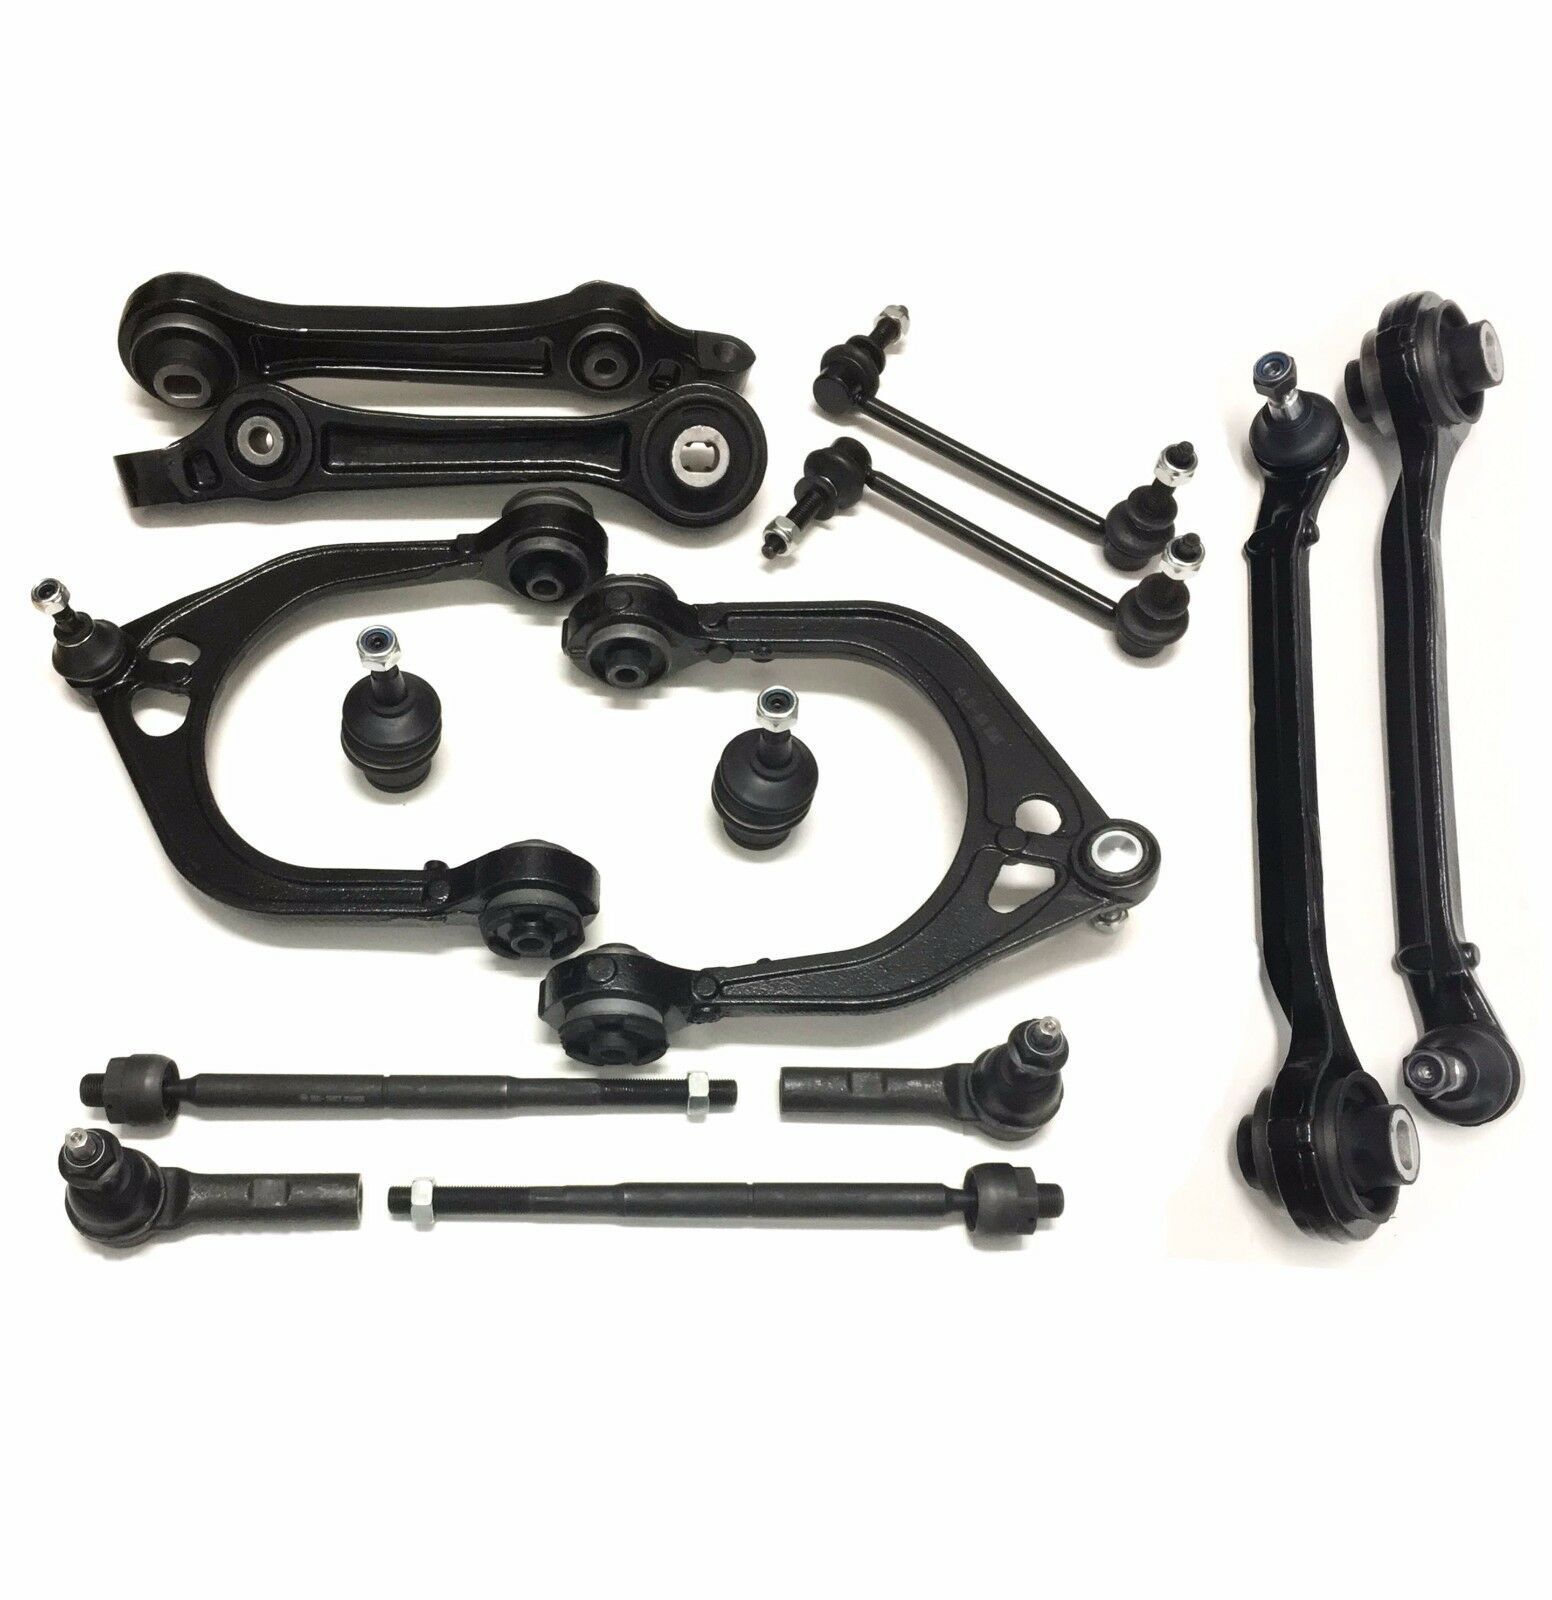 14 Pc Front Control Arms Tie Rods for Dodge Charger Challenger 300 RWD Magnum